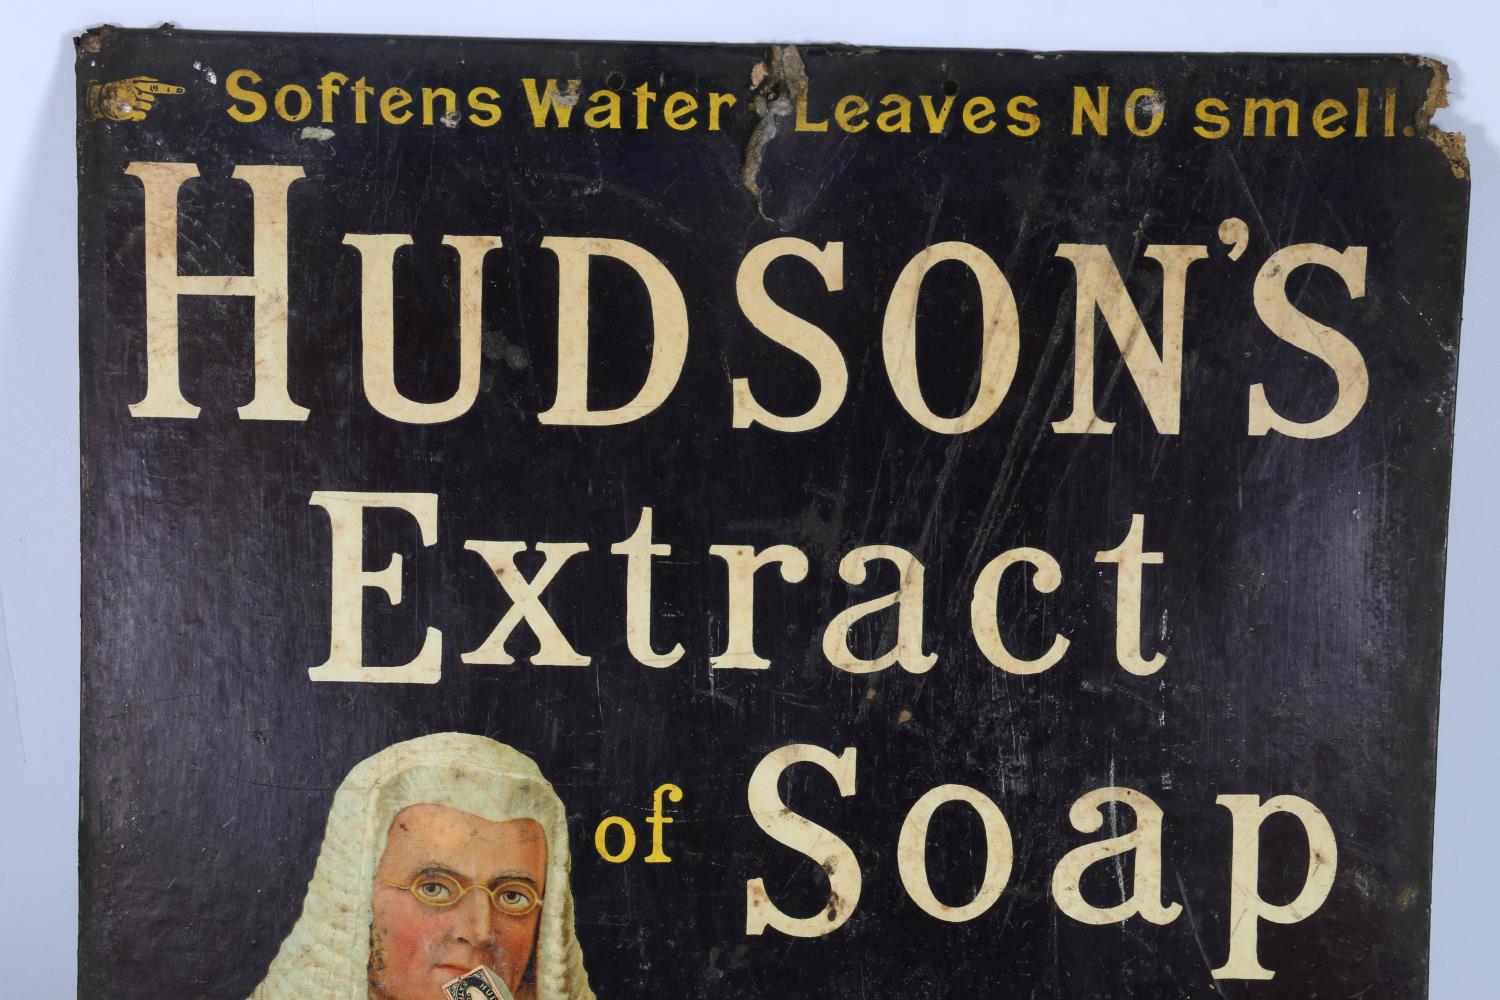 Vintage advertisement sign for 'Hudson's Extract of Soap', 46cm x 33cm. - Image 2 of 4